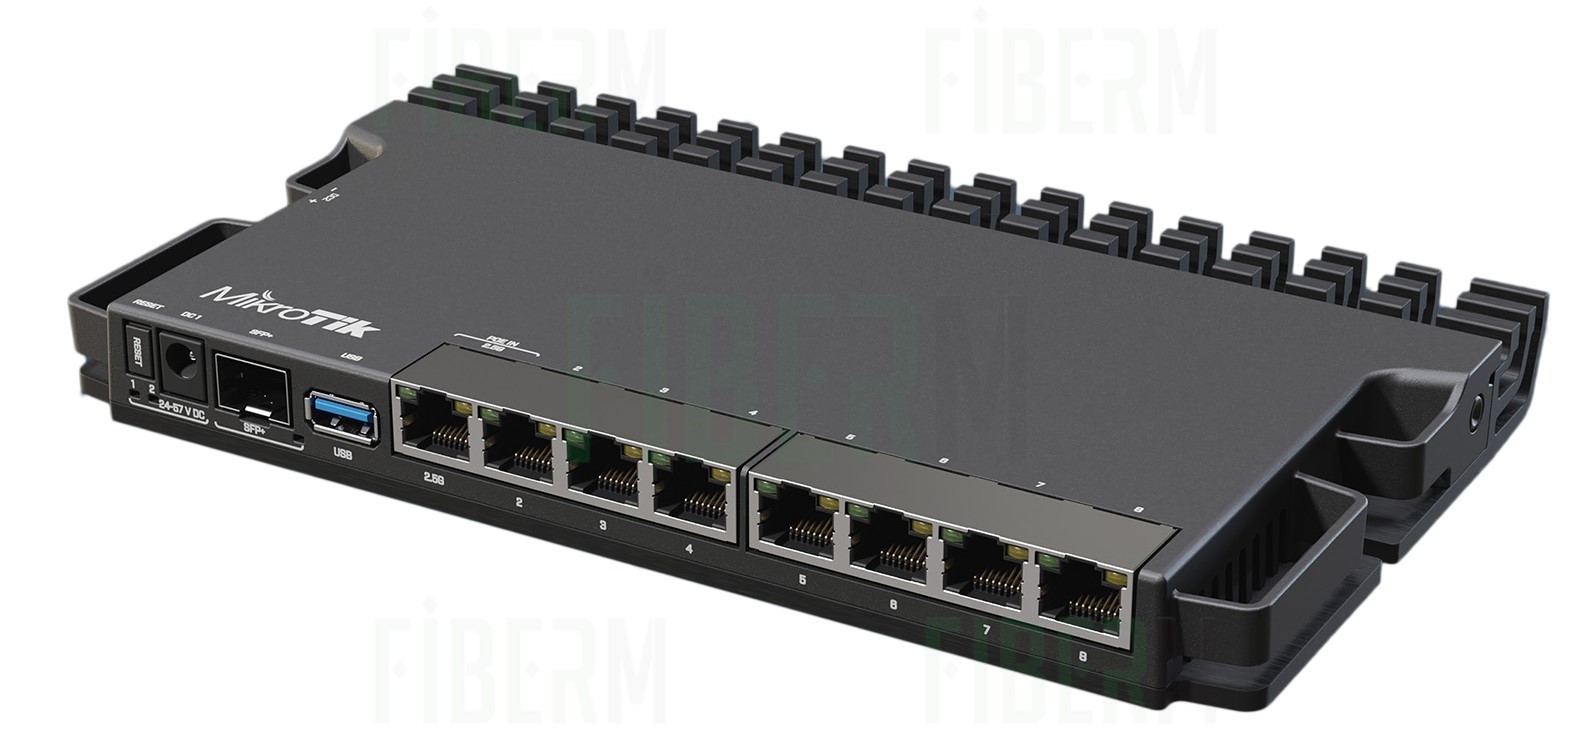 MikroTik RB5009UG+S+IN router 7x 10/100/1000 1x 2.5GE 1x SFP+